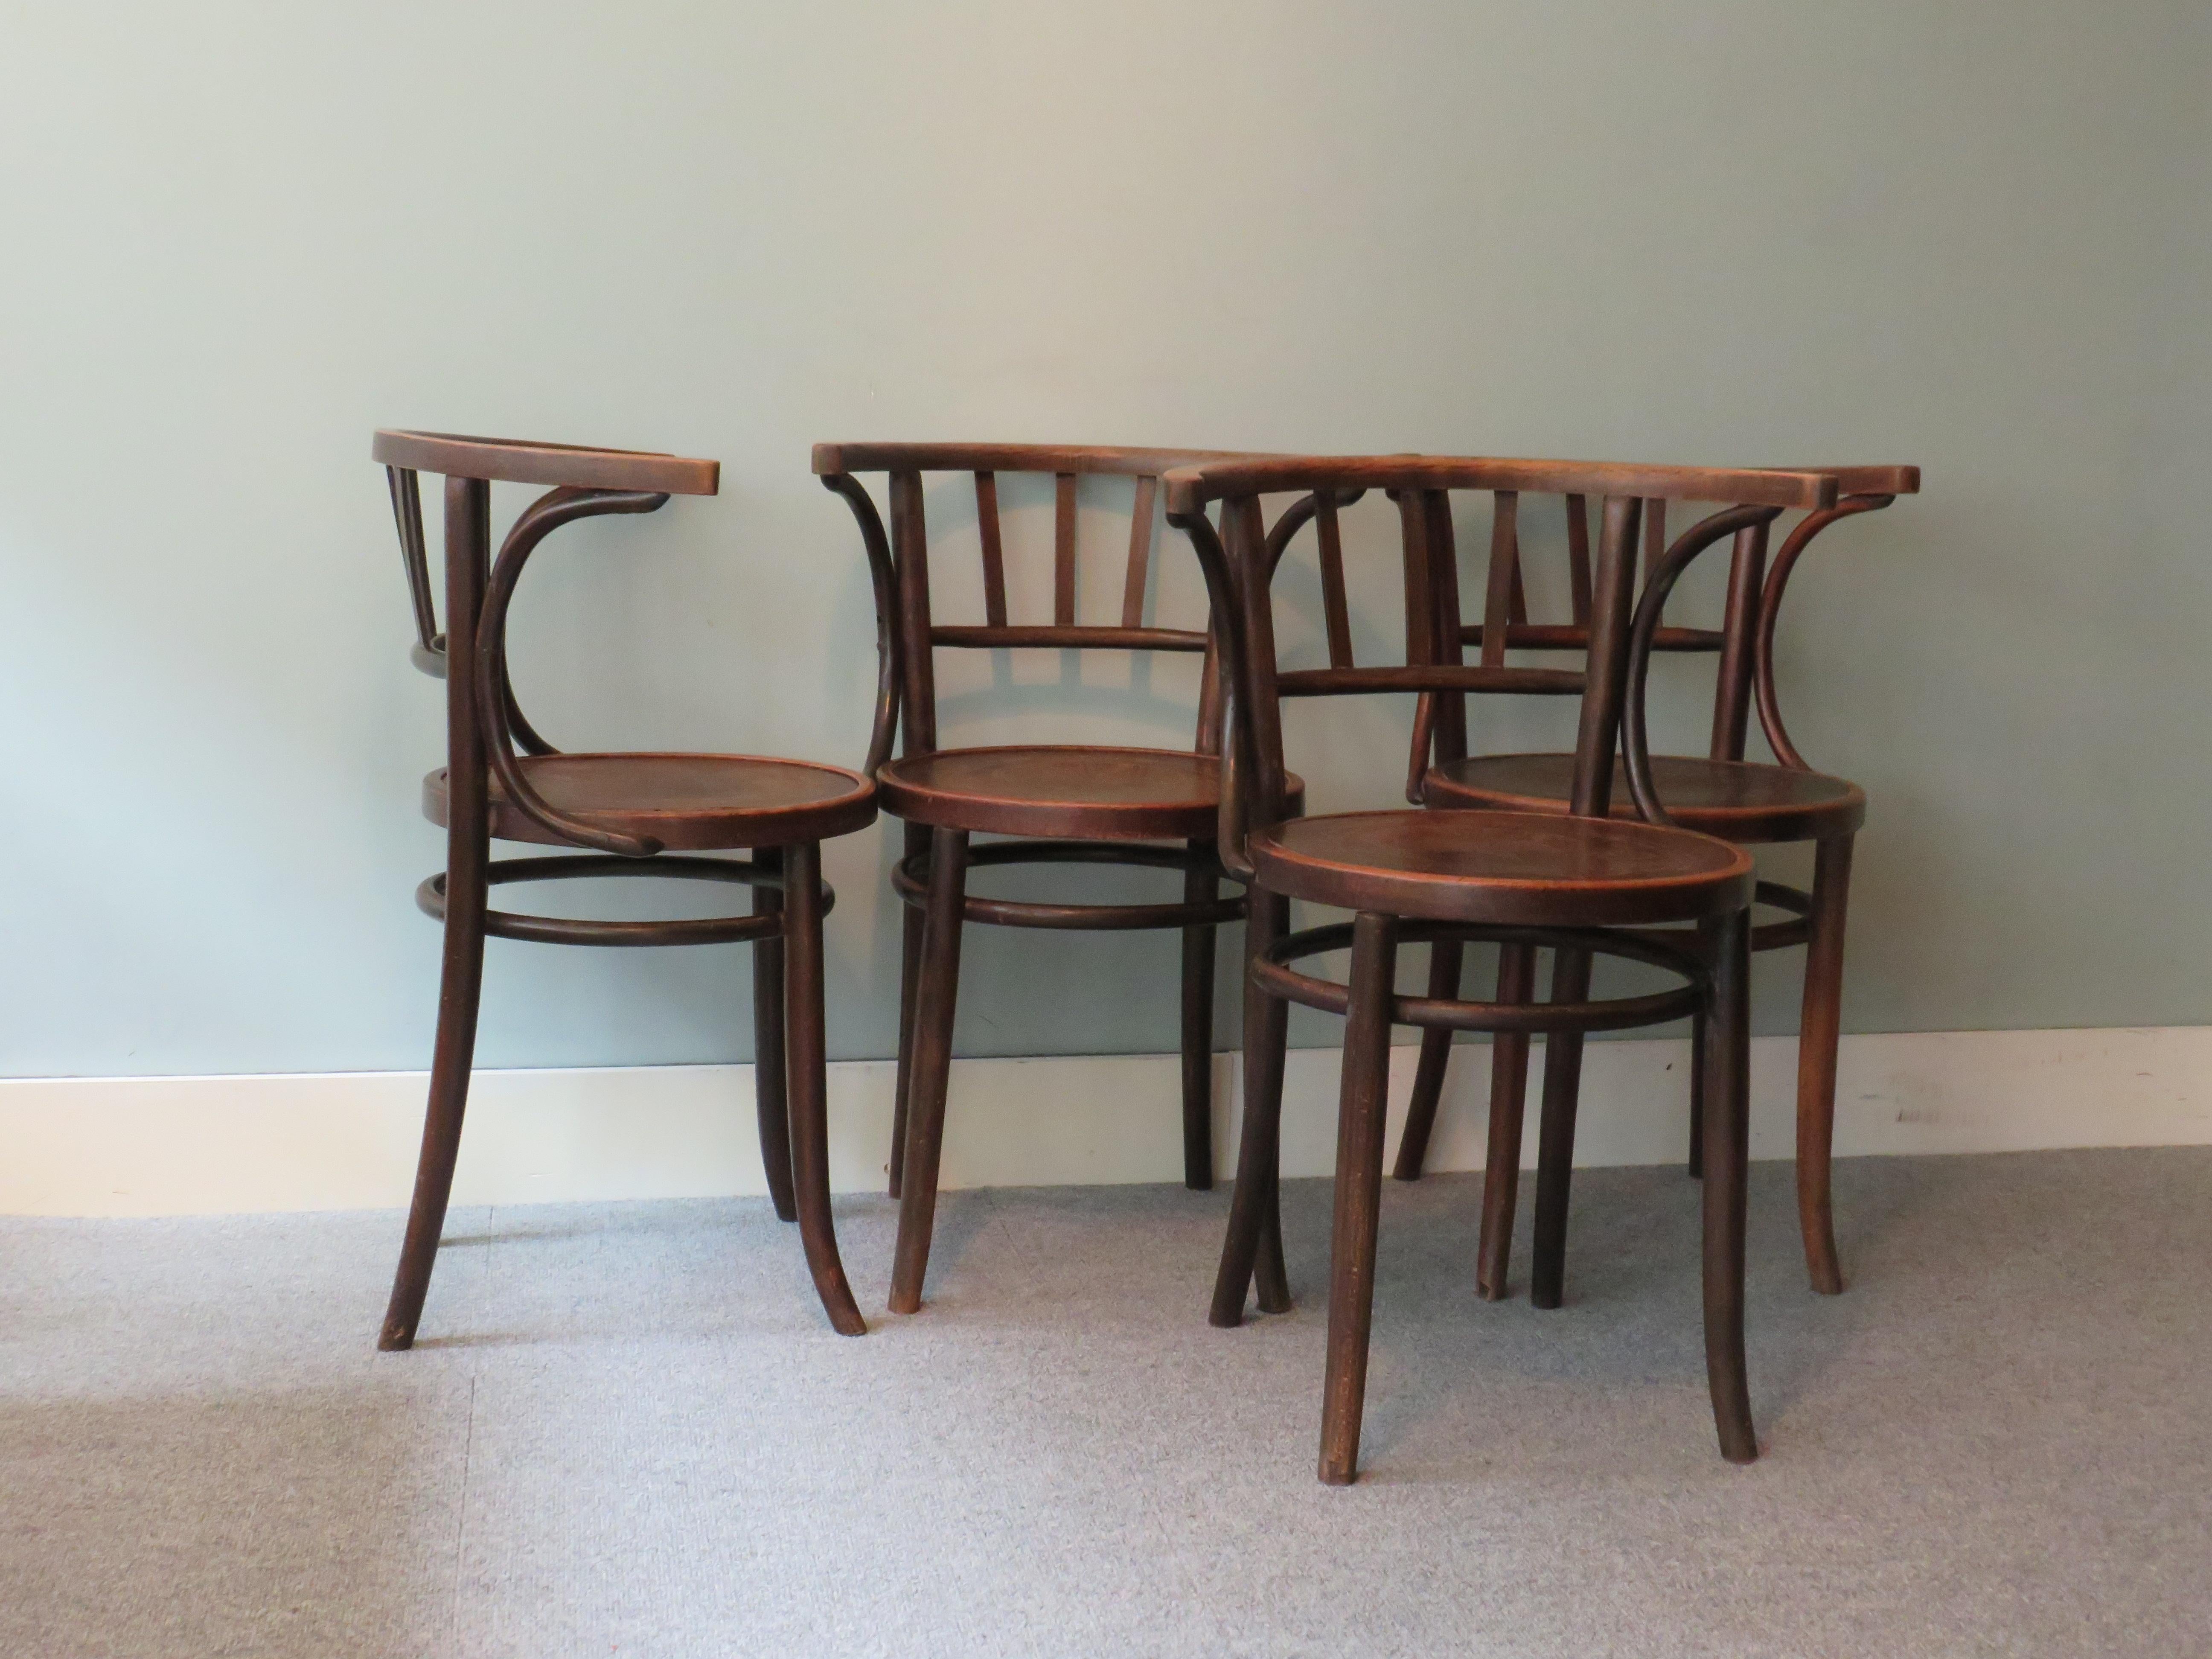 Austrian Bentwood Chairs, Early 1900 Attributed to Thonet